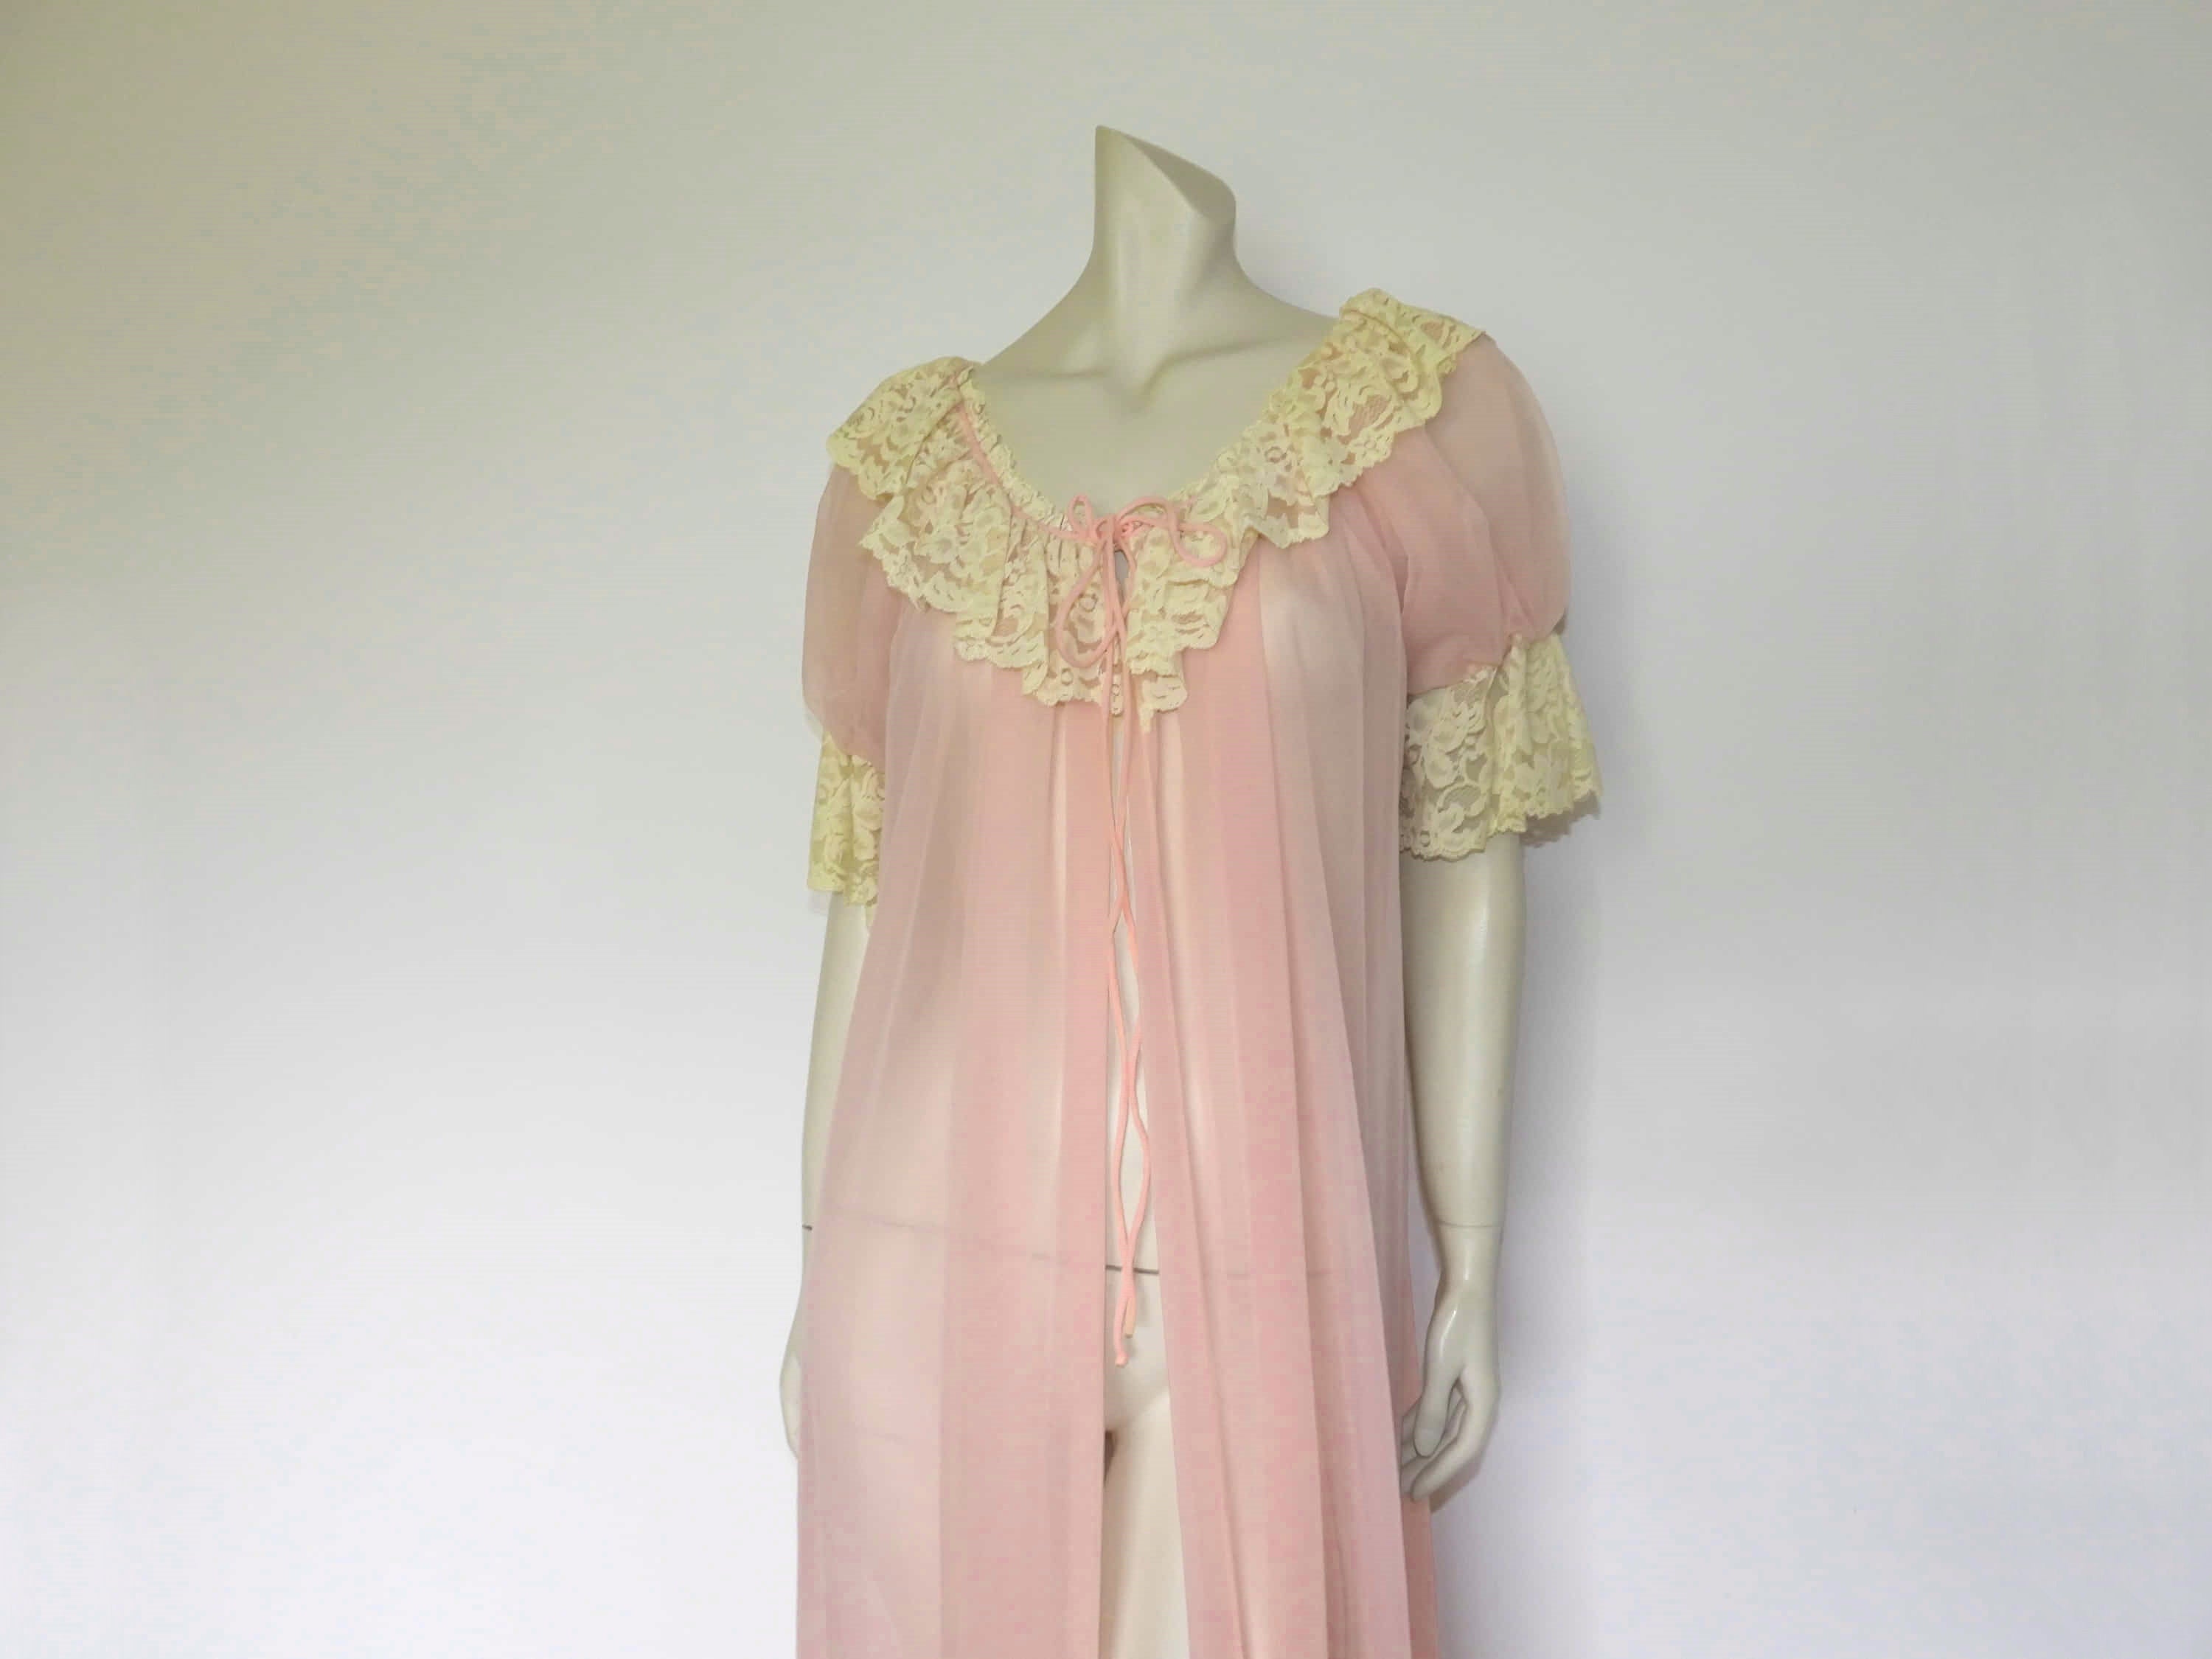 1960s vintage pink nylon peignoir negligee with puff sleeves and cream lace